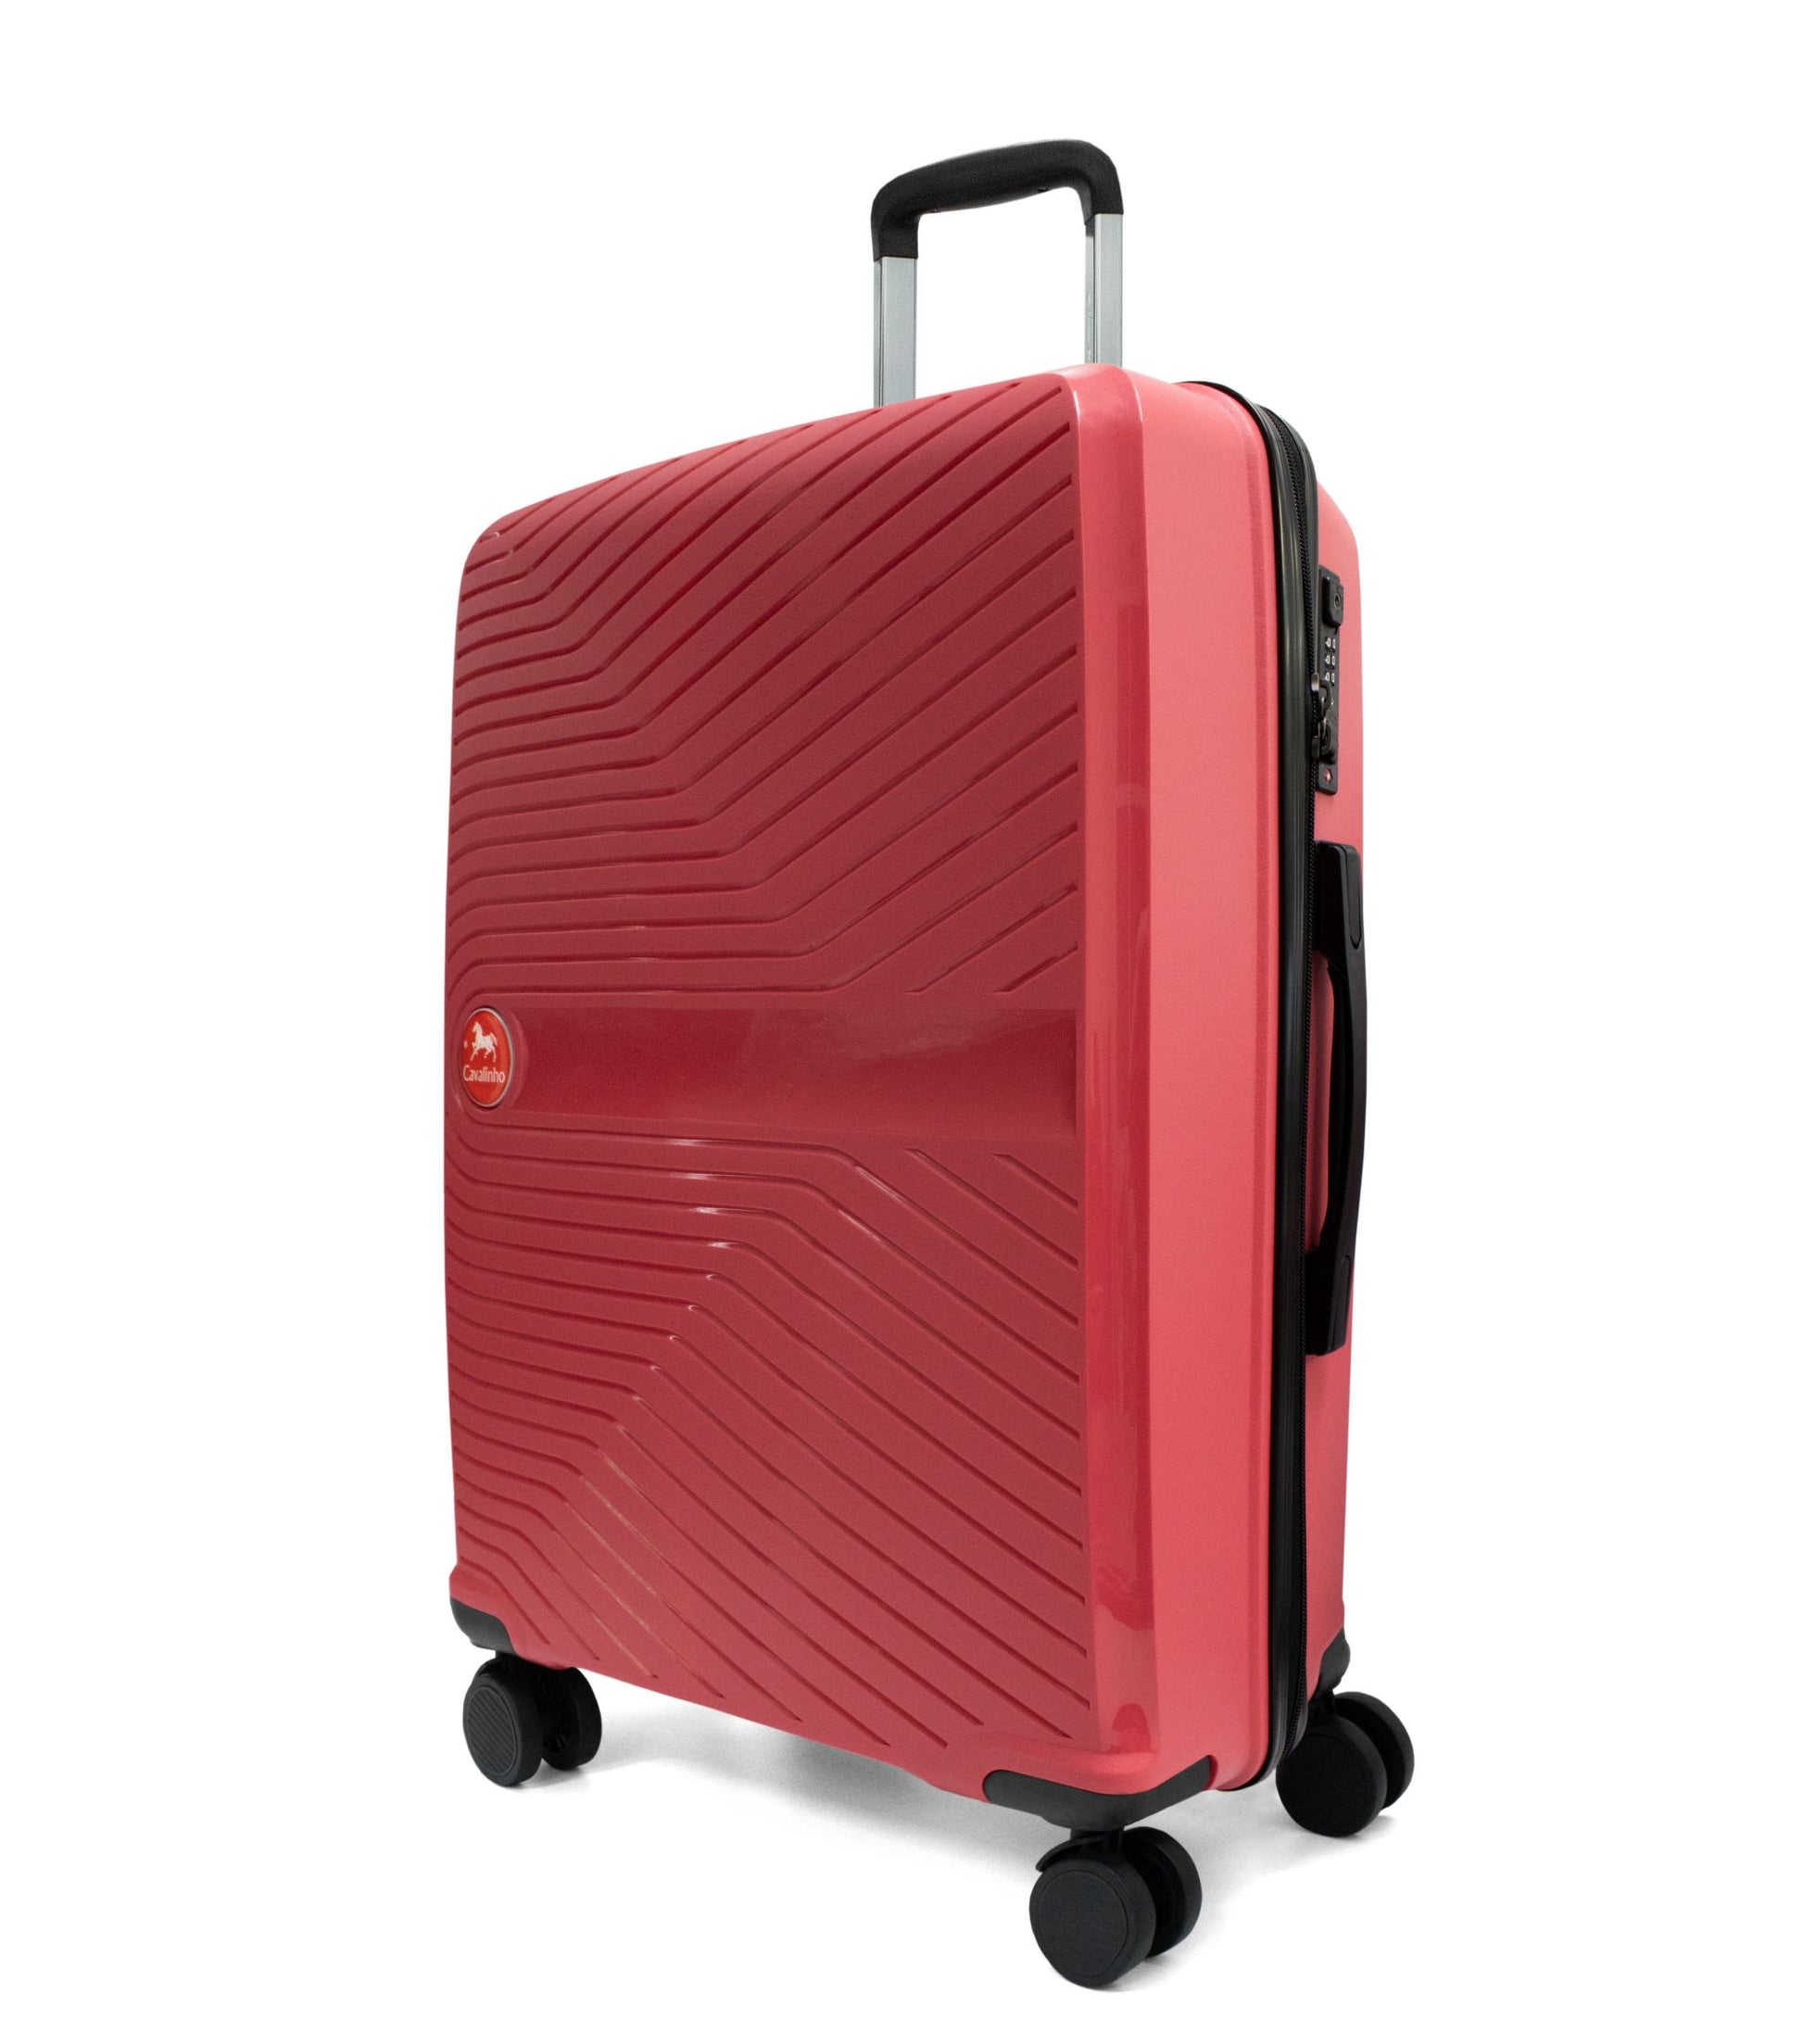 Cavalinho Colorful Check-in Hardside Luggage (24") - 24 inch Coral - 68020004.27.24_2